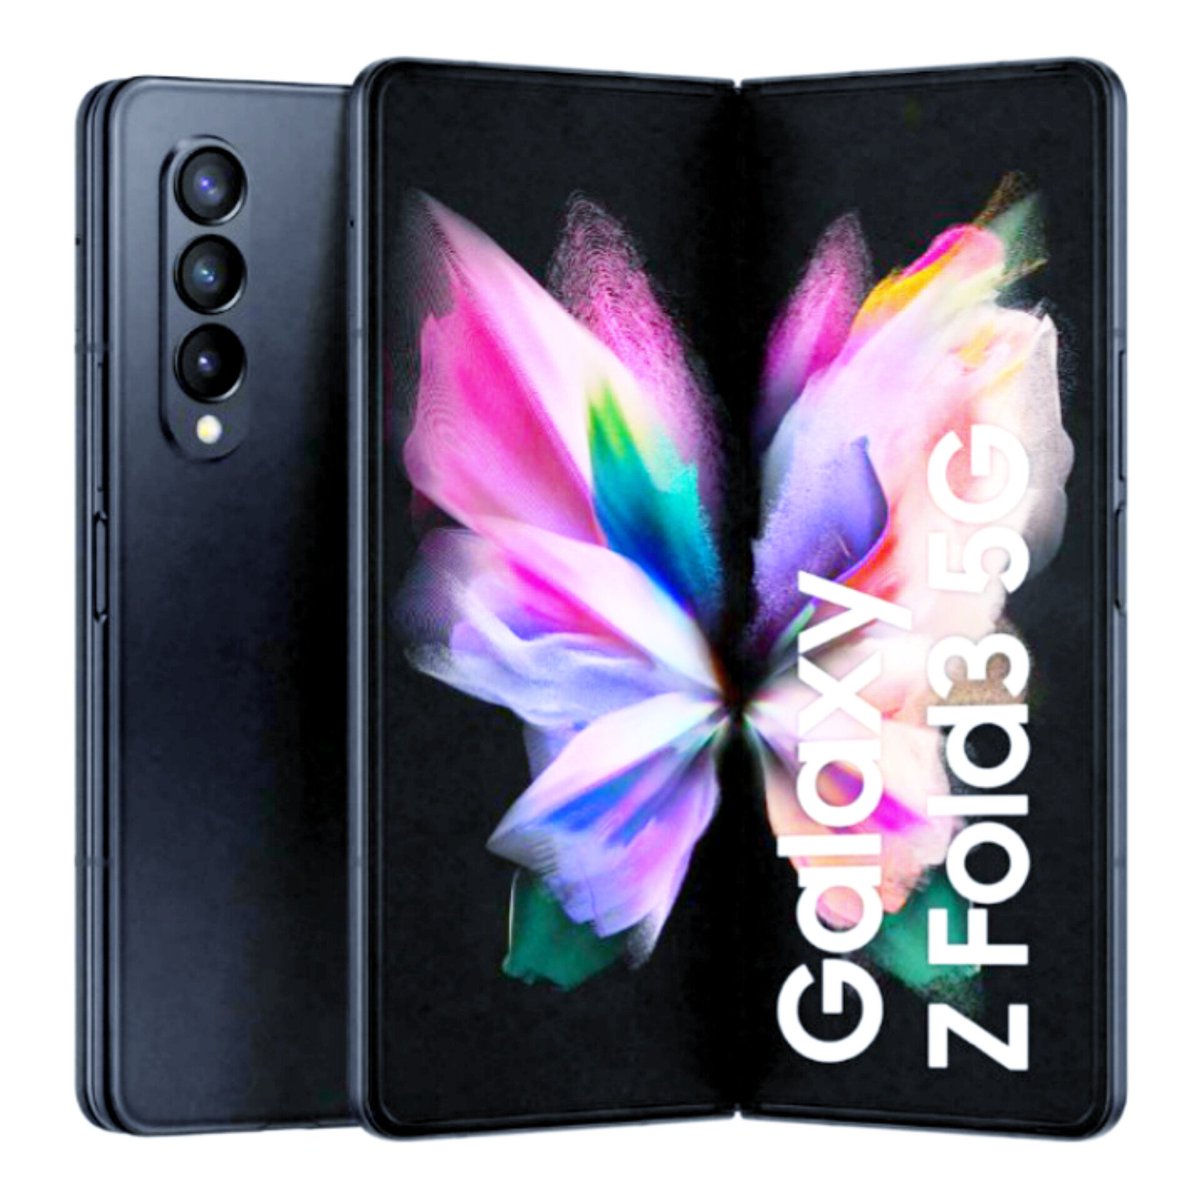 Samsung Galaxy Z Fold 3 gets Android 14 based OneUI 6 Stable Update 

🔥Available : US 🇺🇸 (Locked Models)

• Version : F926USQU4HWL1
• Security Patch Level : 1 DECEMBER 2023

#OneUI6
#Android14
#GalaxyZFold3